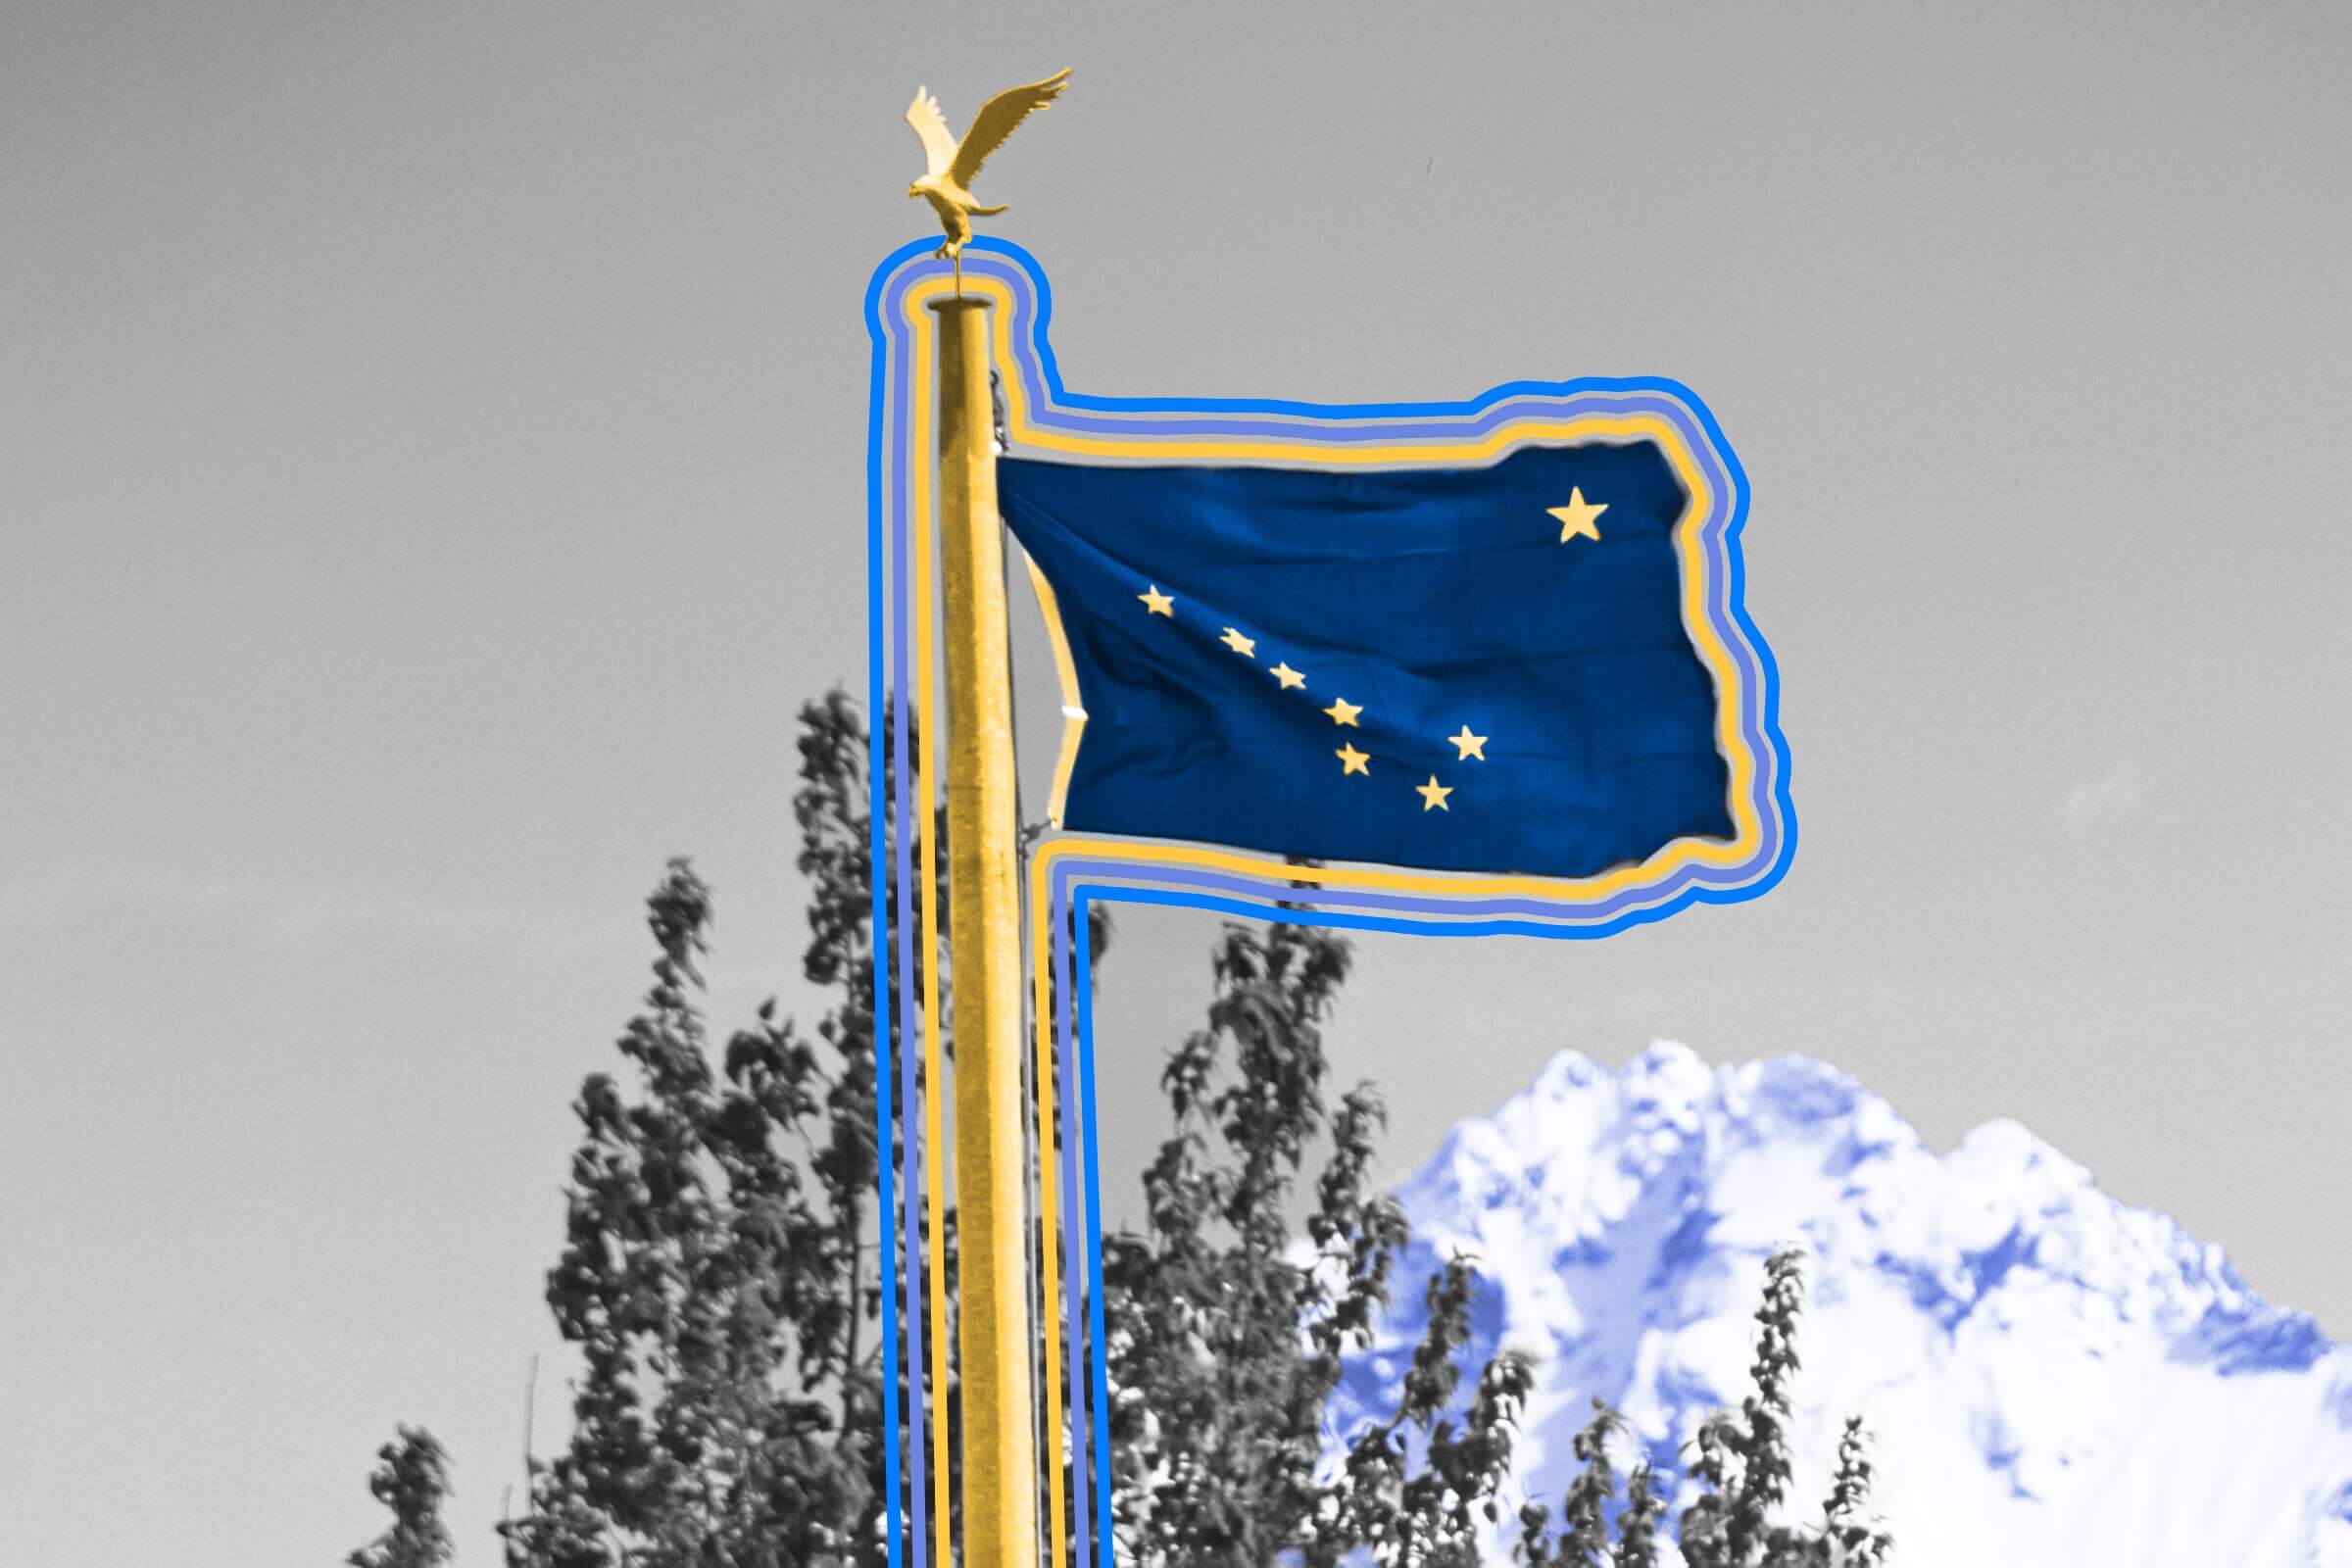 Alaska’s flag was created by a 13-year-old.